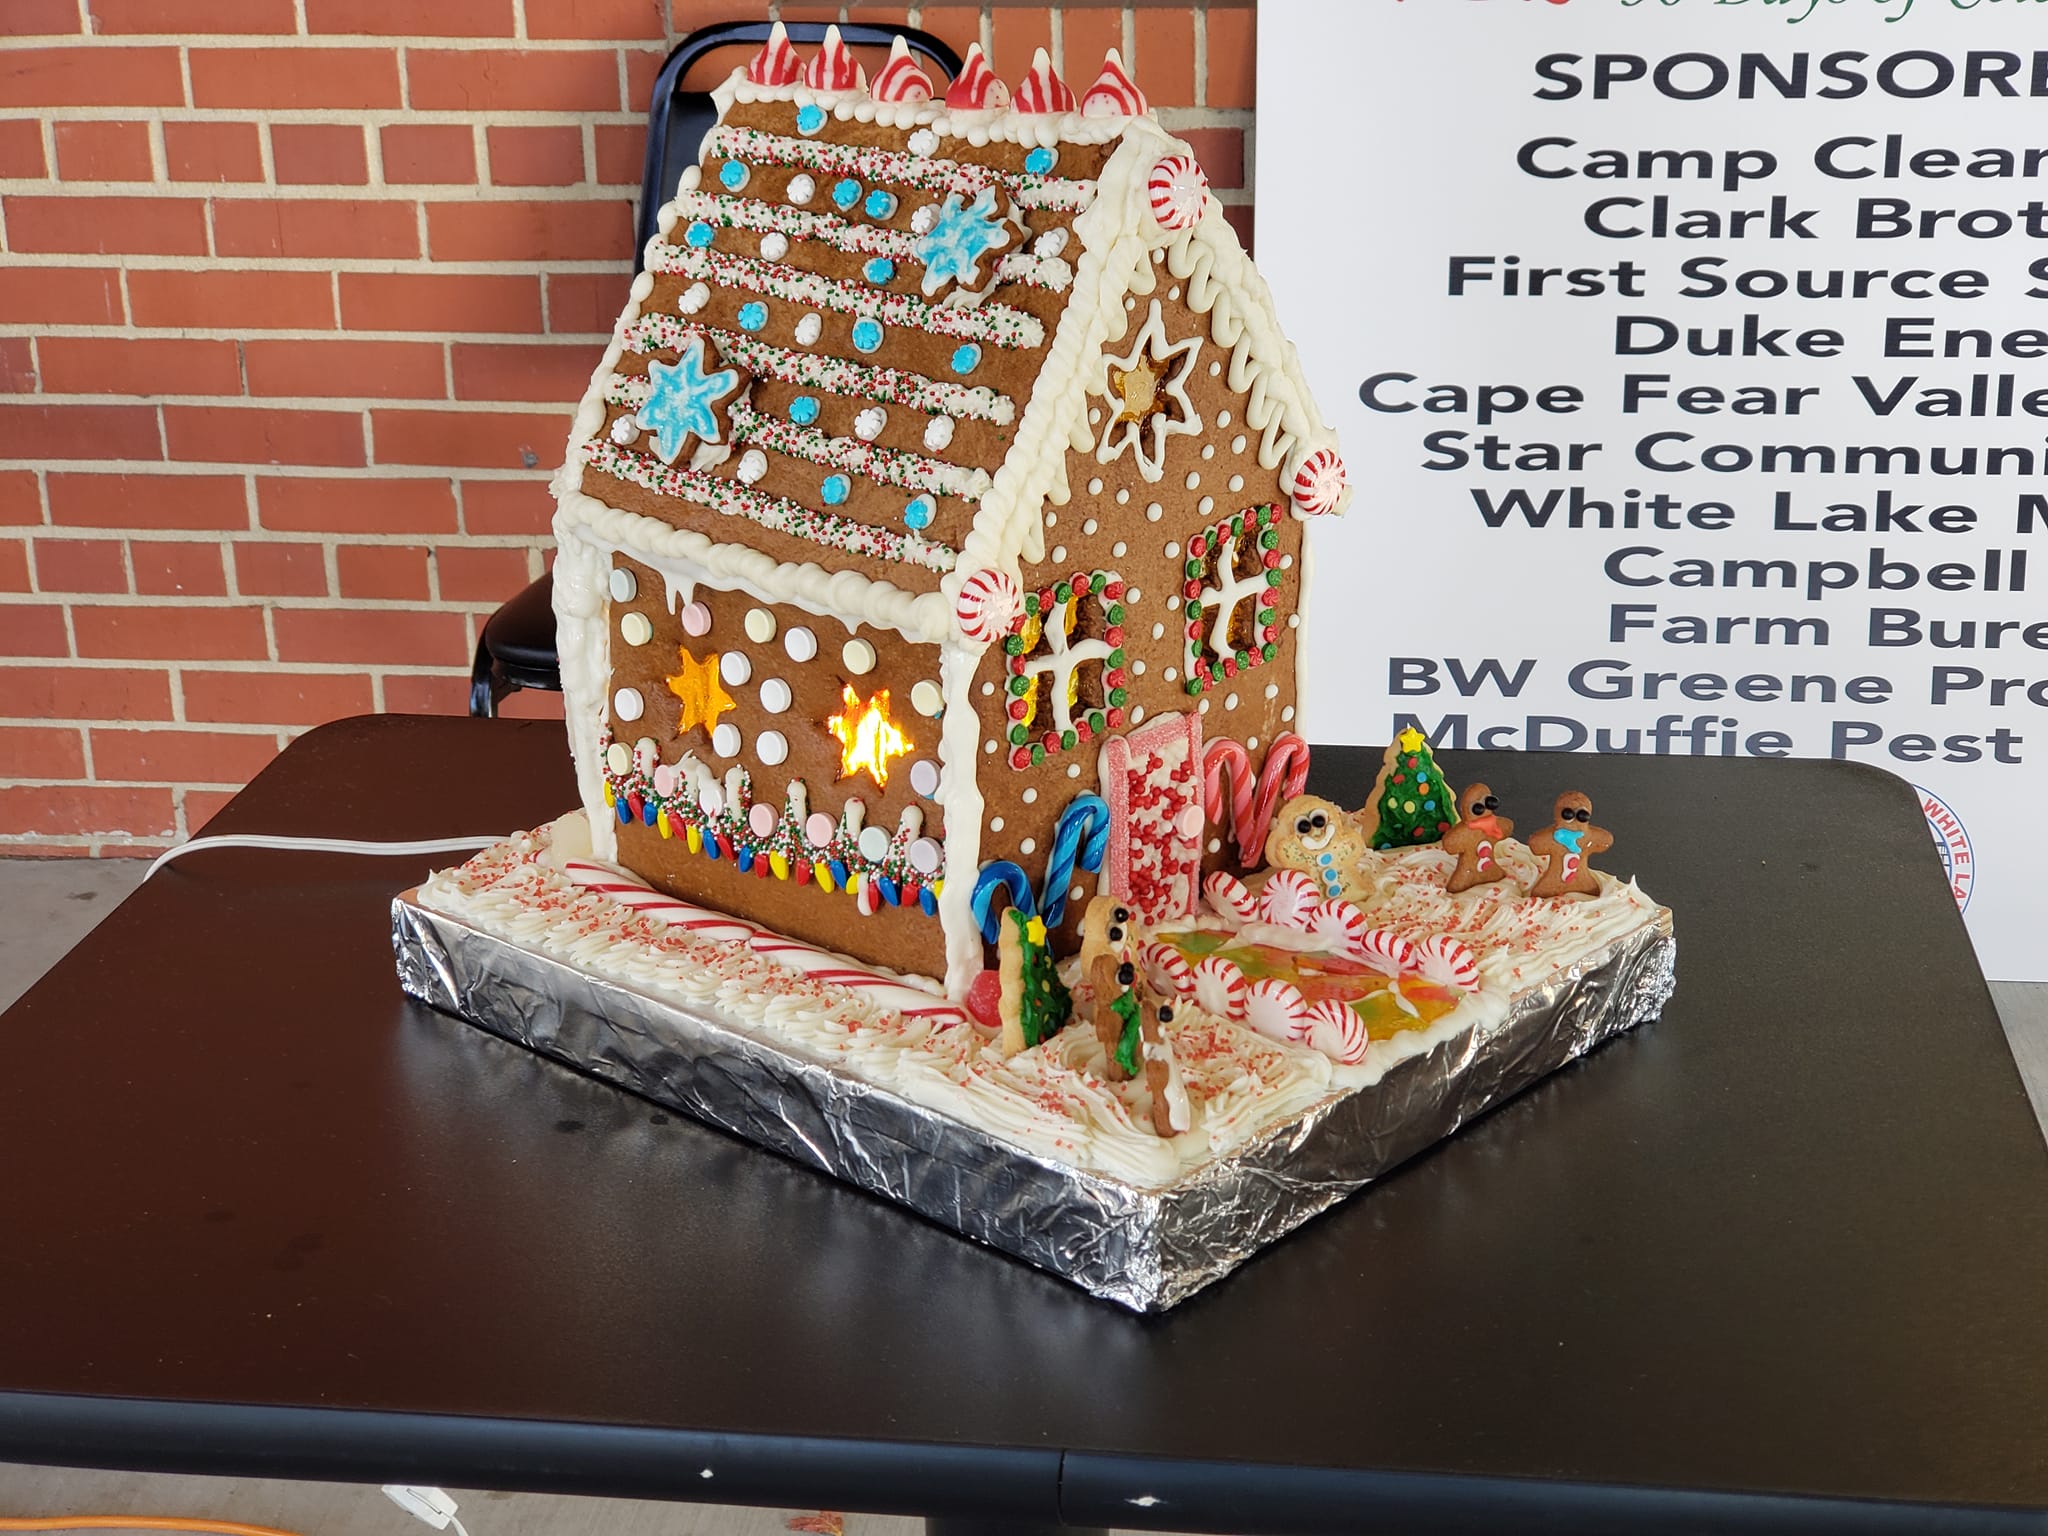 Gingerbread house photo by Chamber of Commerce